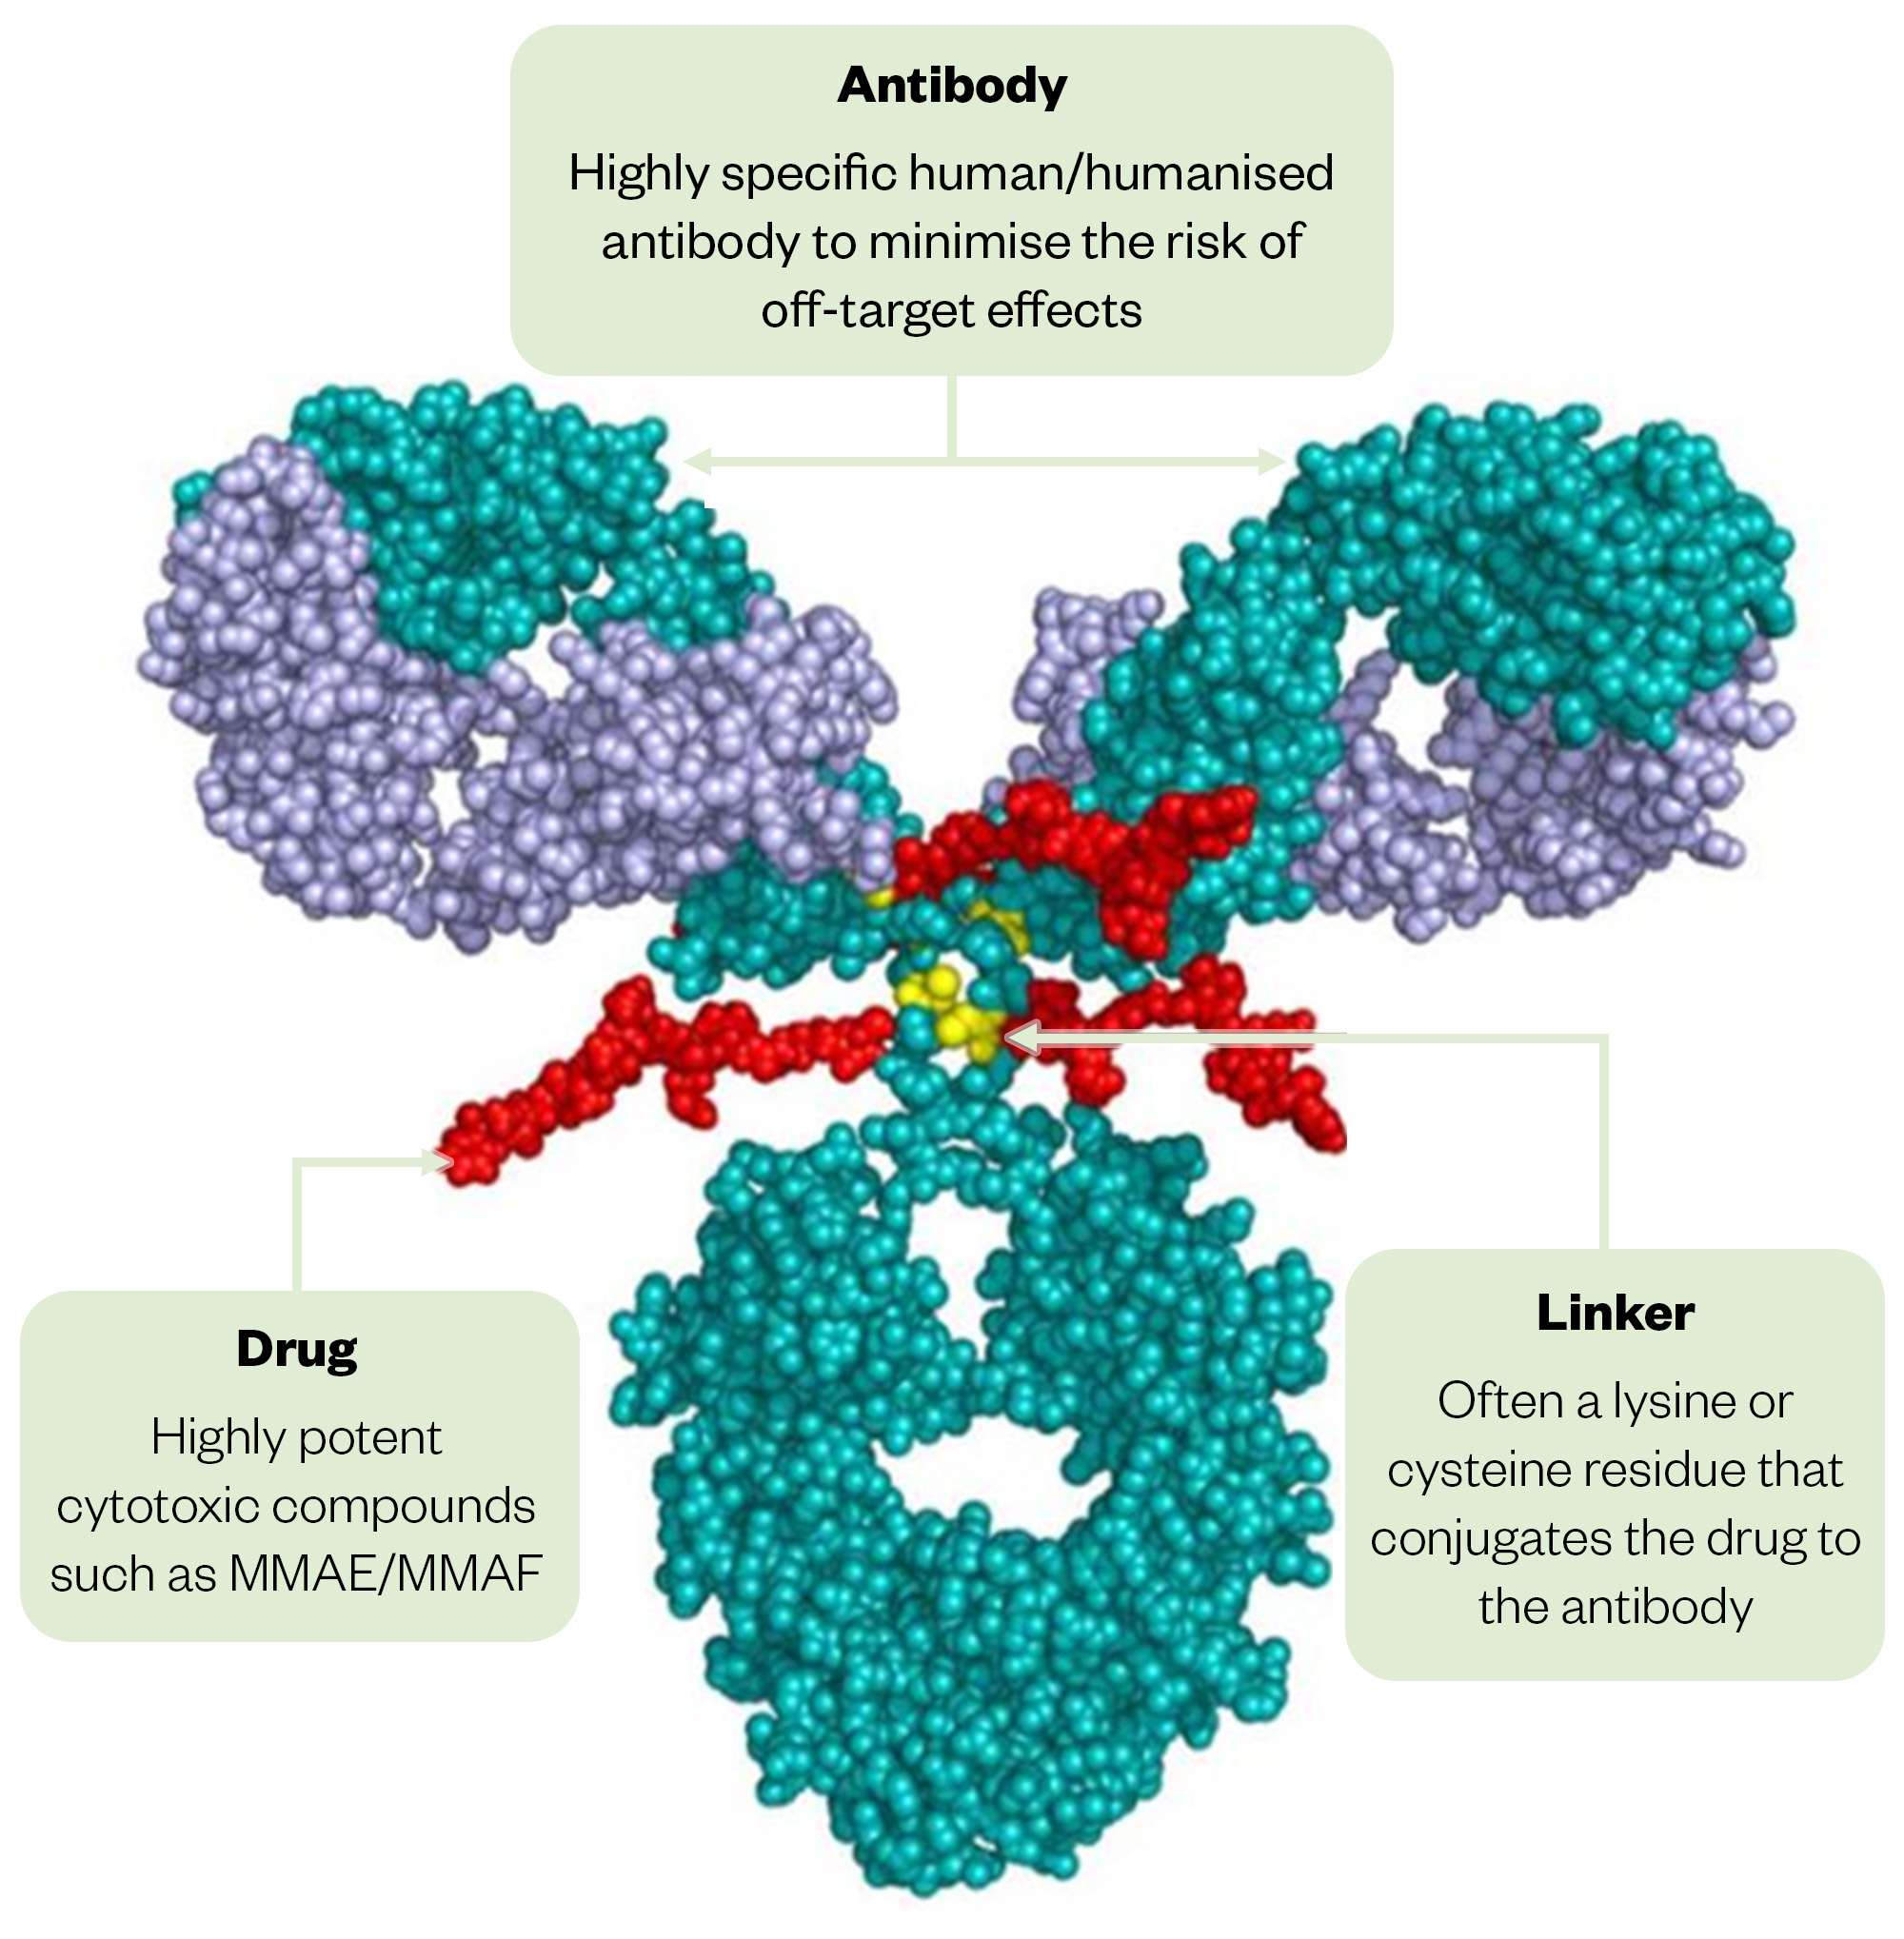 Diagram of an antibody with interactions of a drug and linker